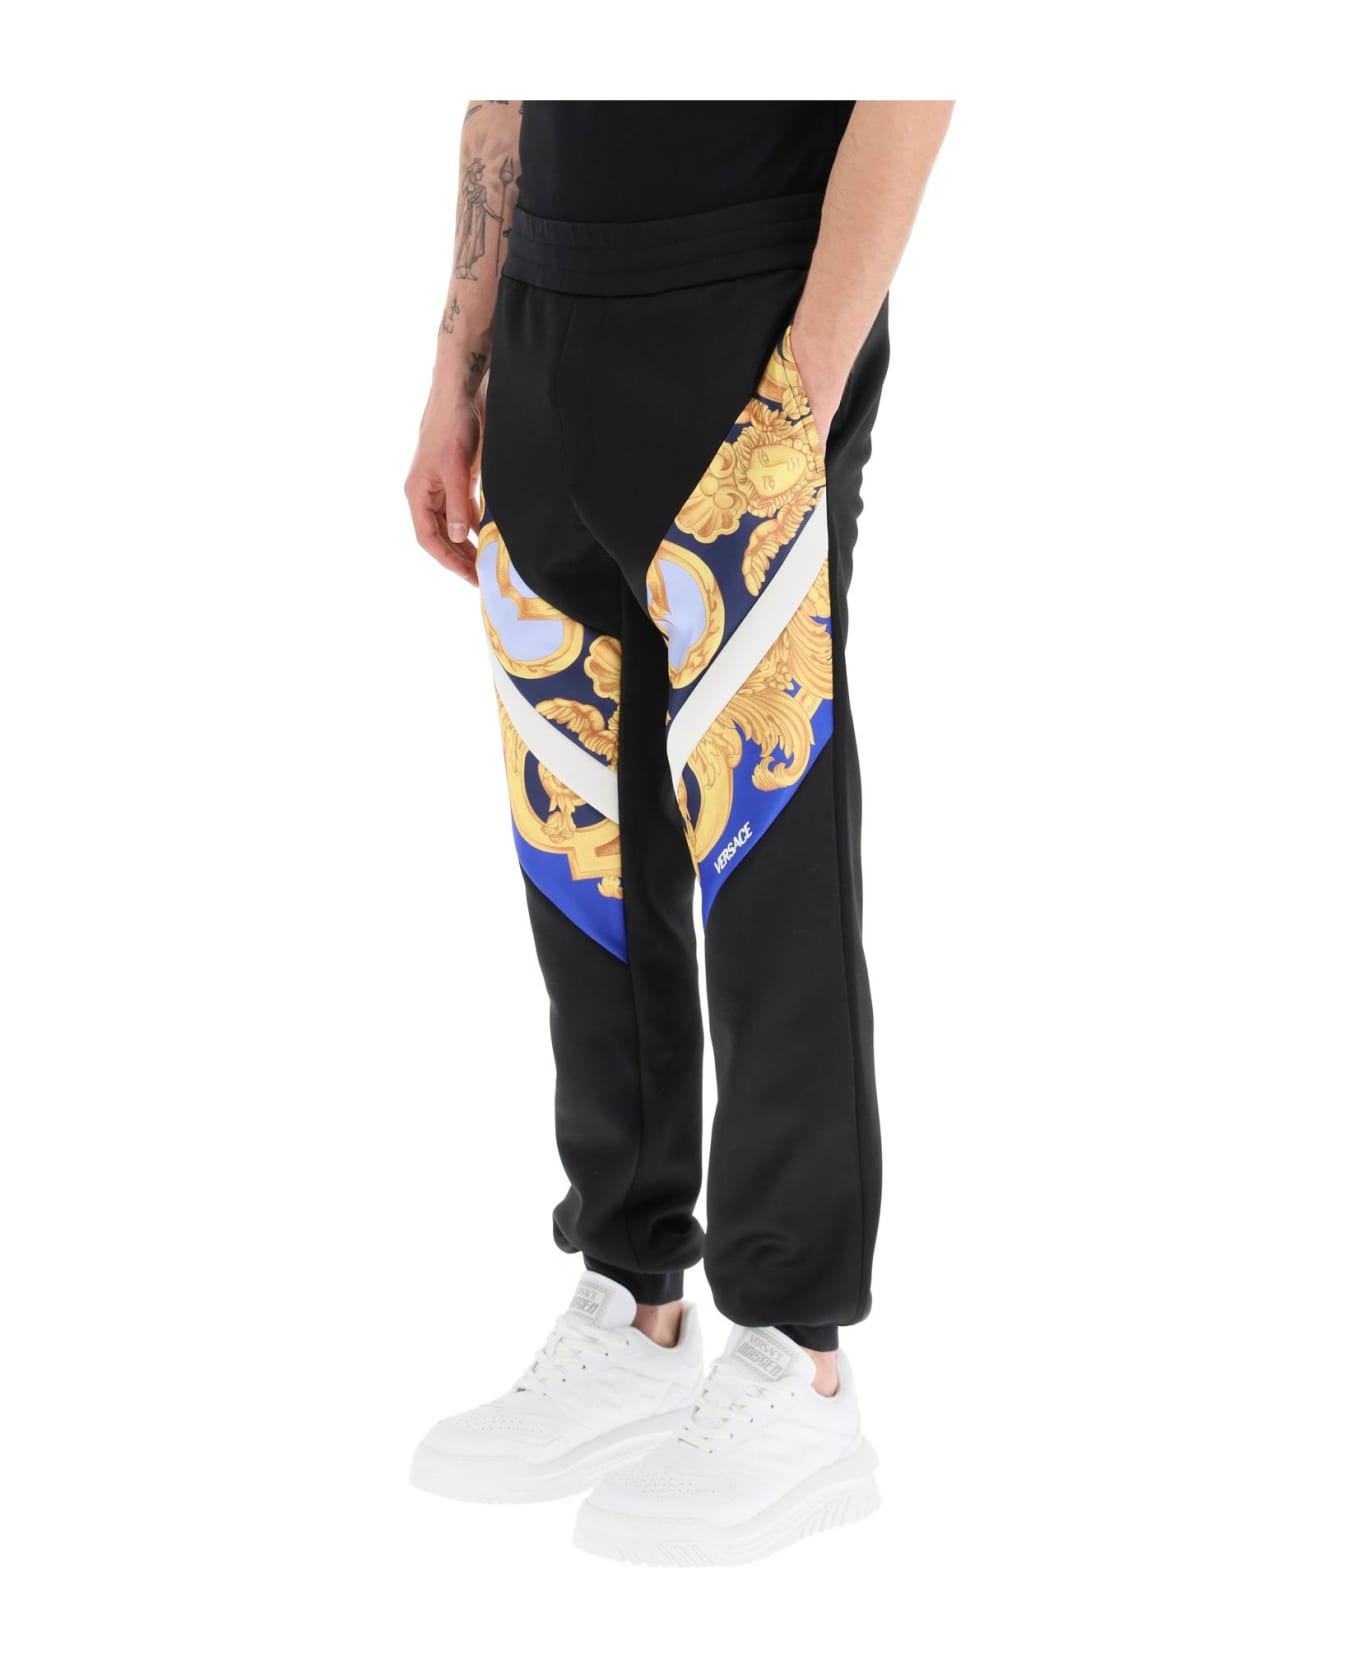 Versace Interlock Track Pants With Barocco 660 Inserts - Blue